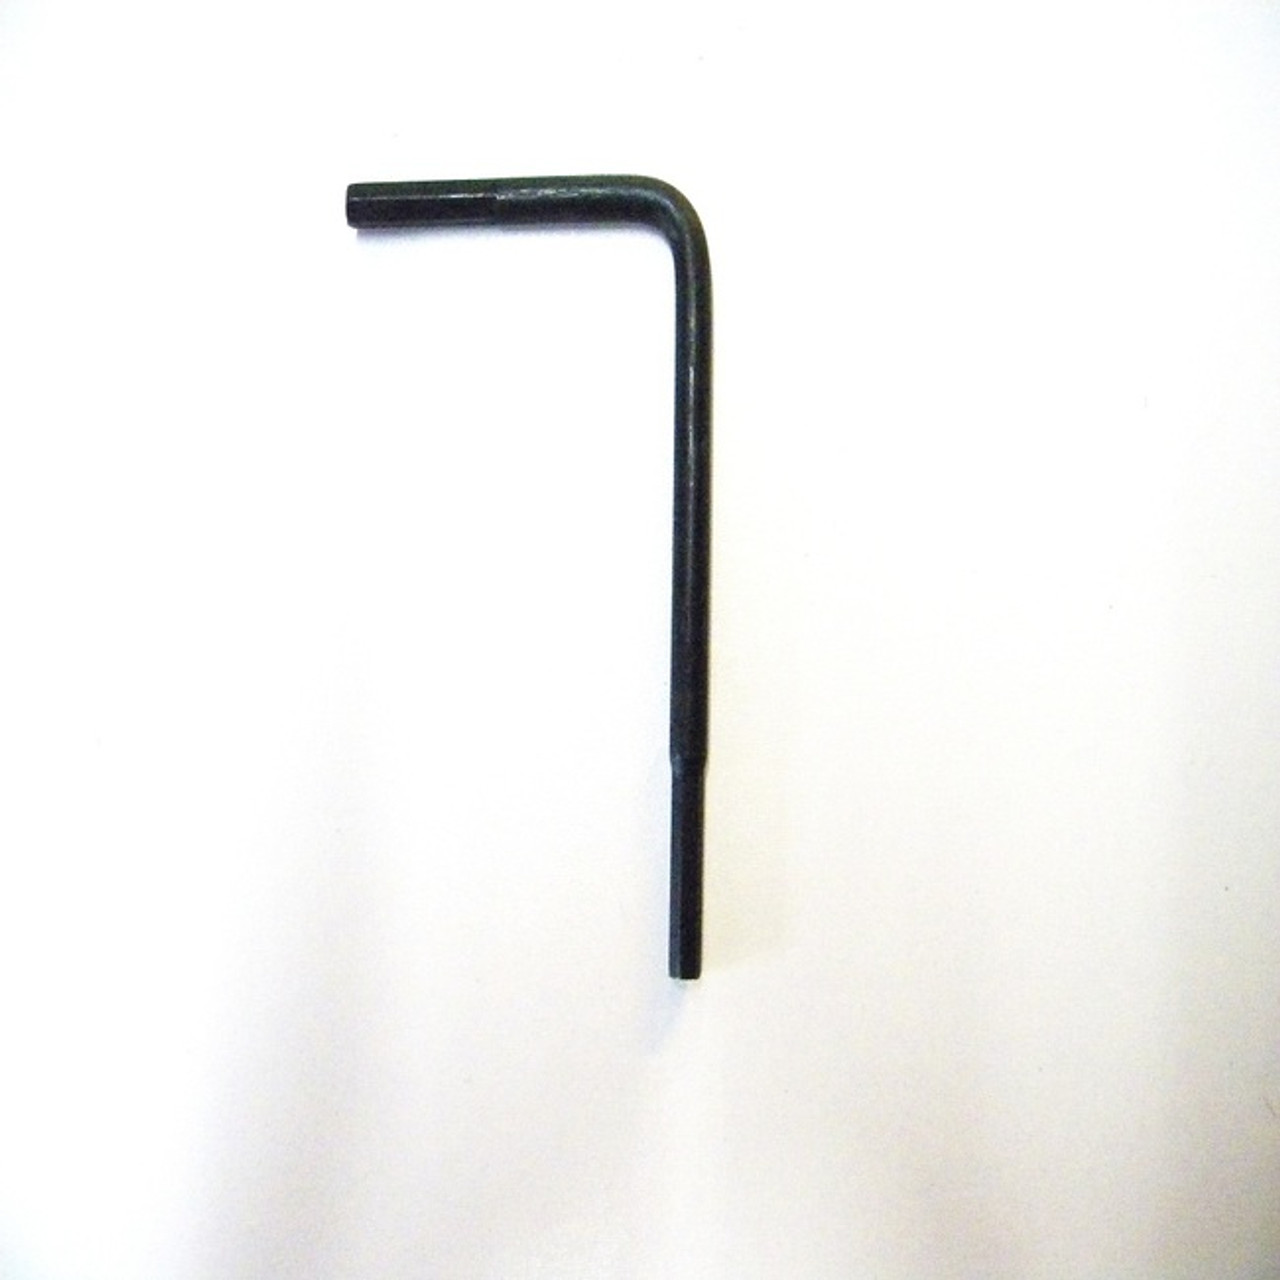 Treadmill Adjustment Wrench Part Number 128457